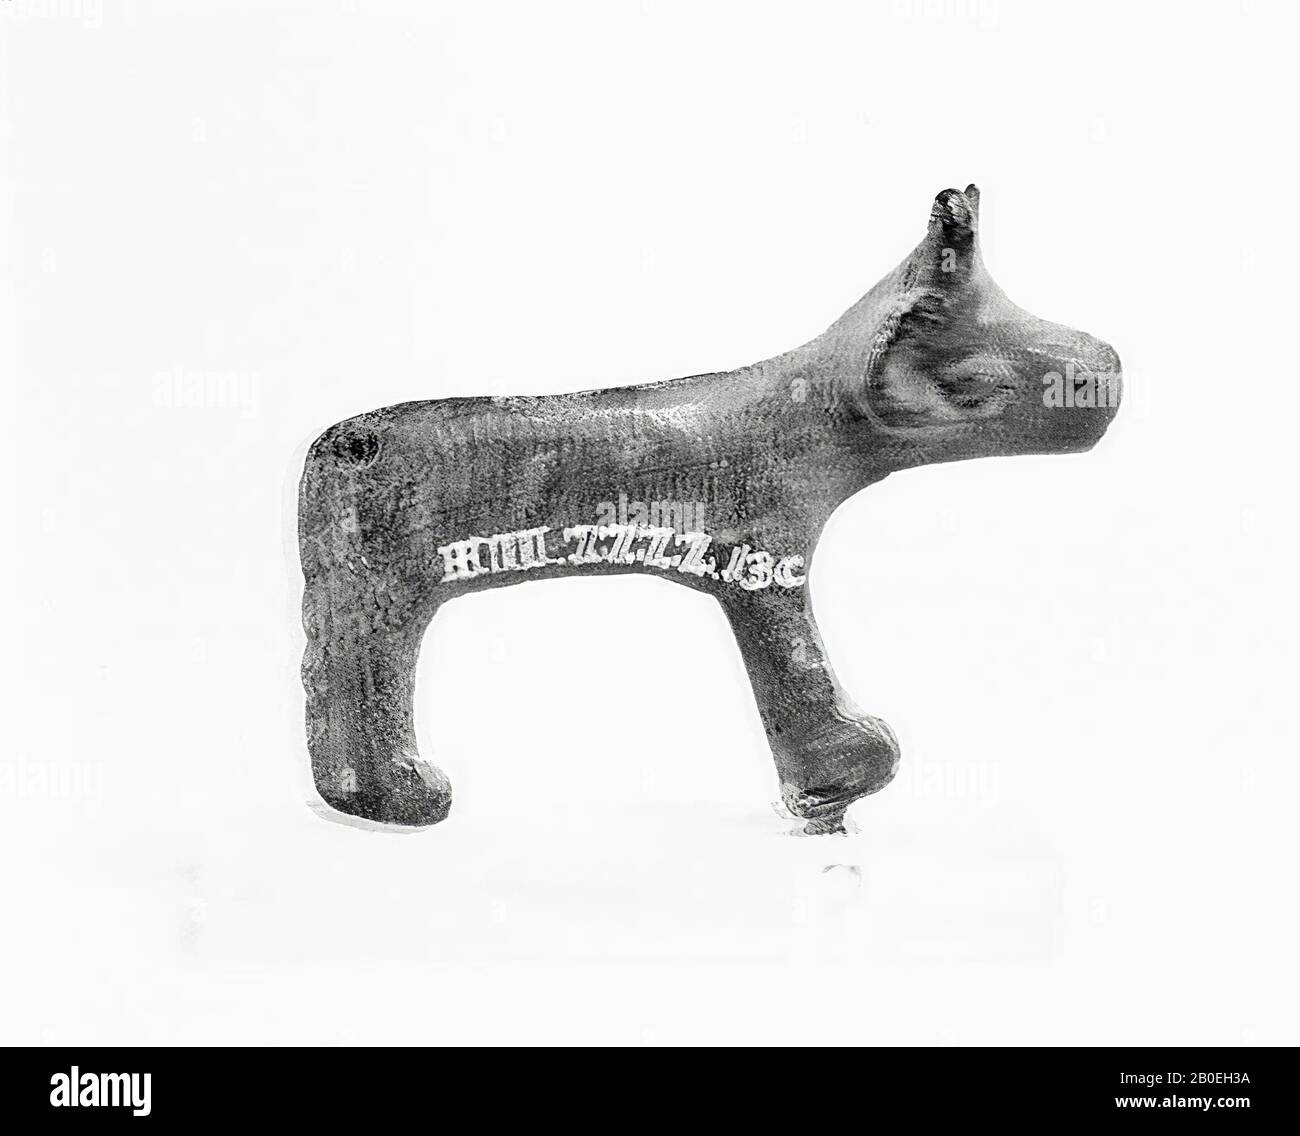 Narrow flat primitive figure. Head from above wide with outstanding horns. Very large eyes, the nostrils are indicated. Both front legs and hind legs form a whole. The long tail hangs straight down., Animal figure, bronze, 5.5 cm, Italy Stock Photo